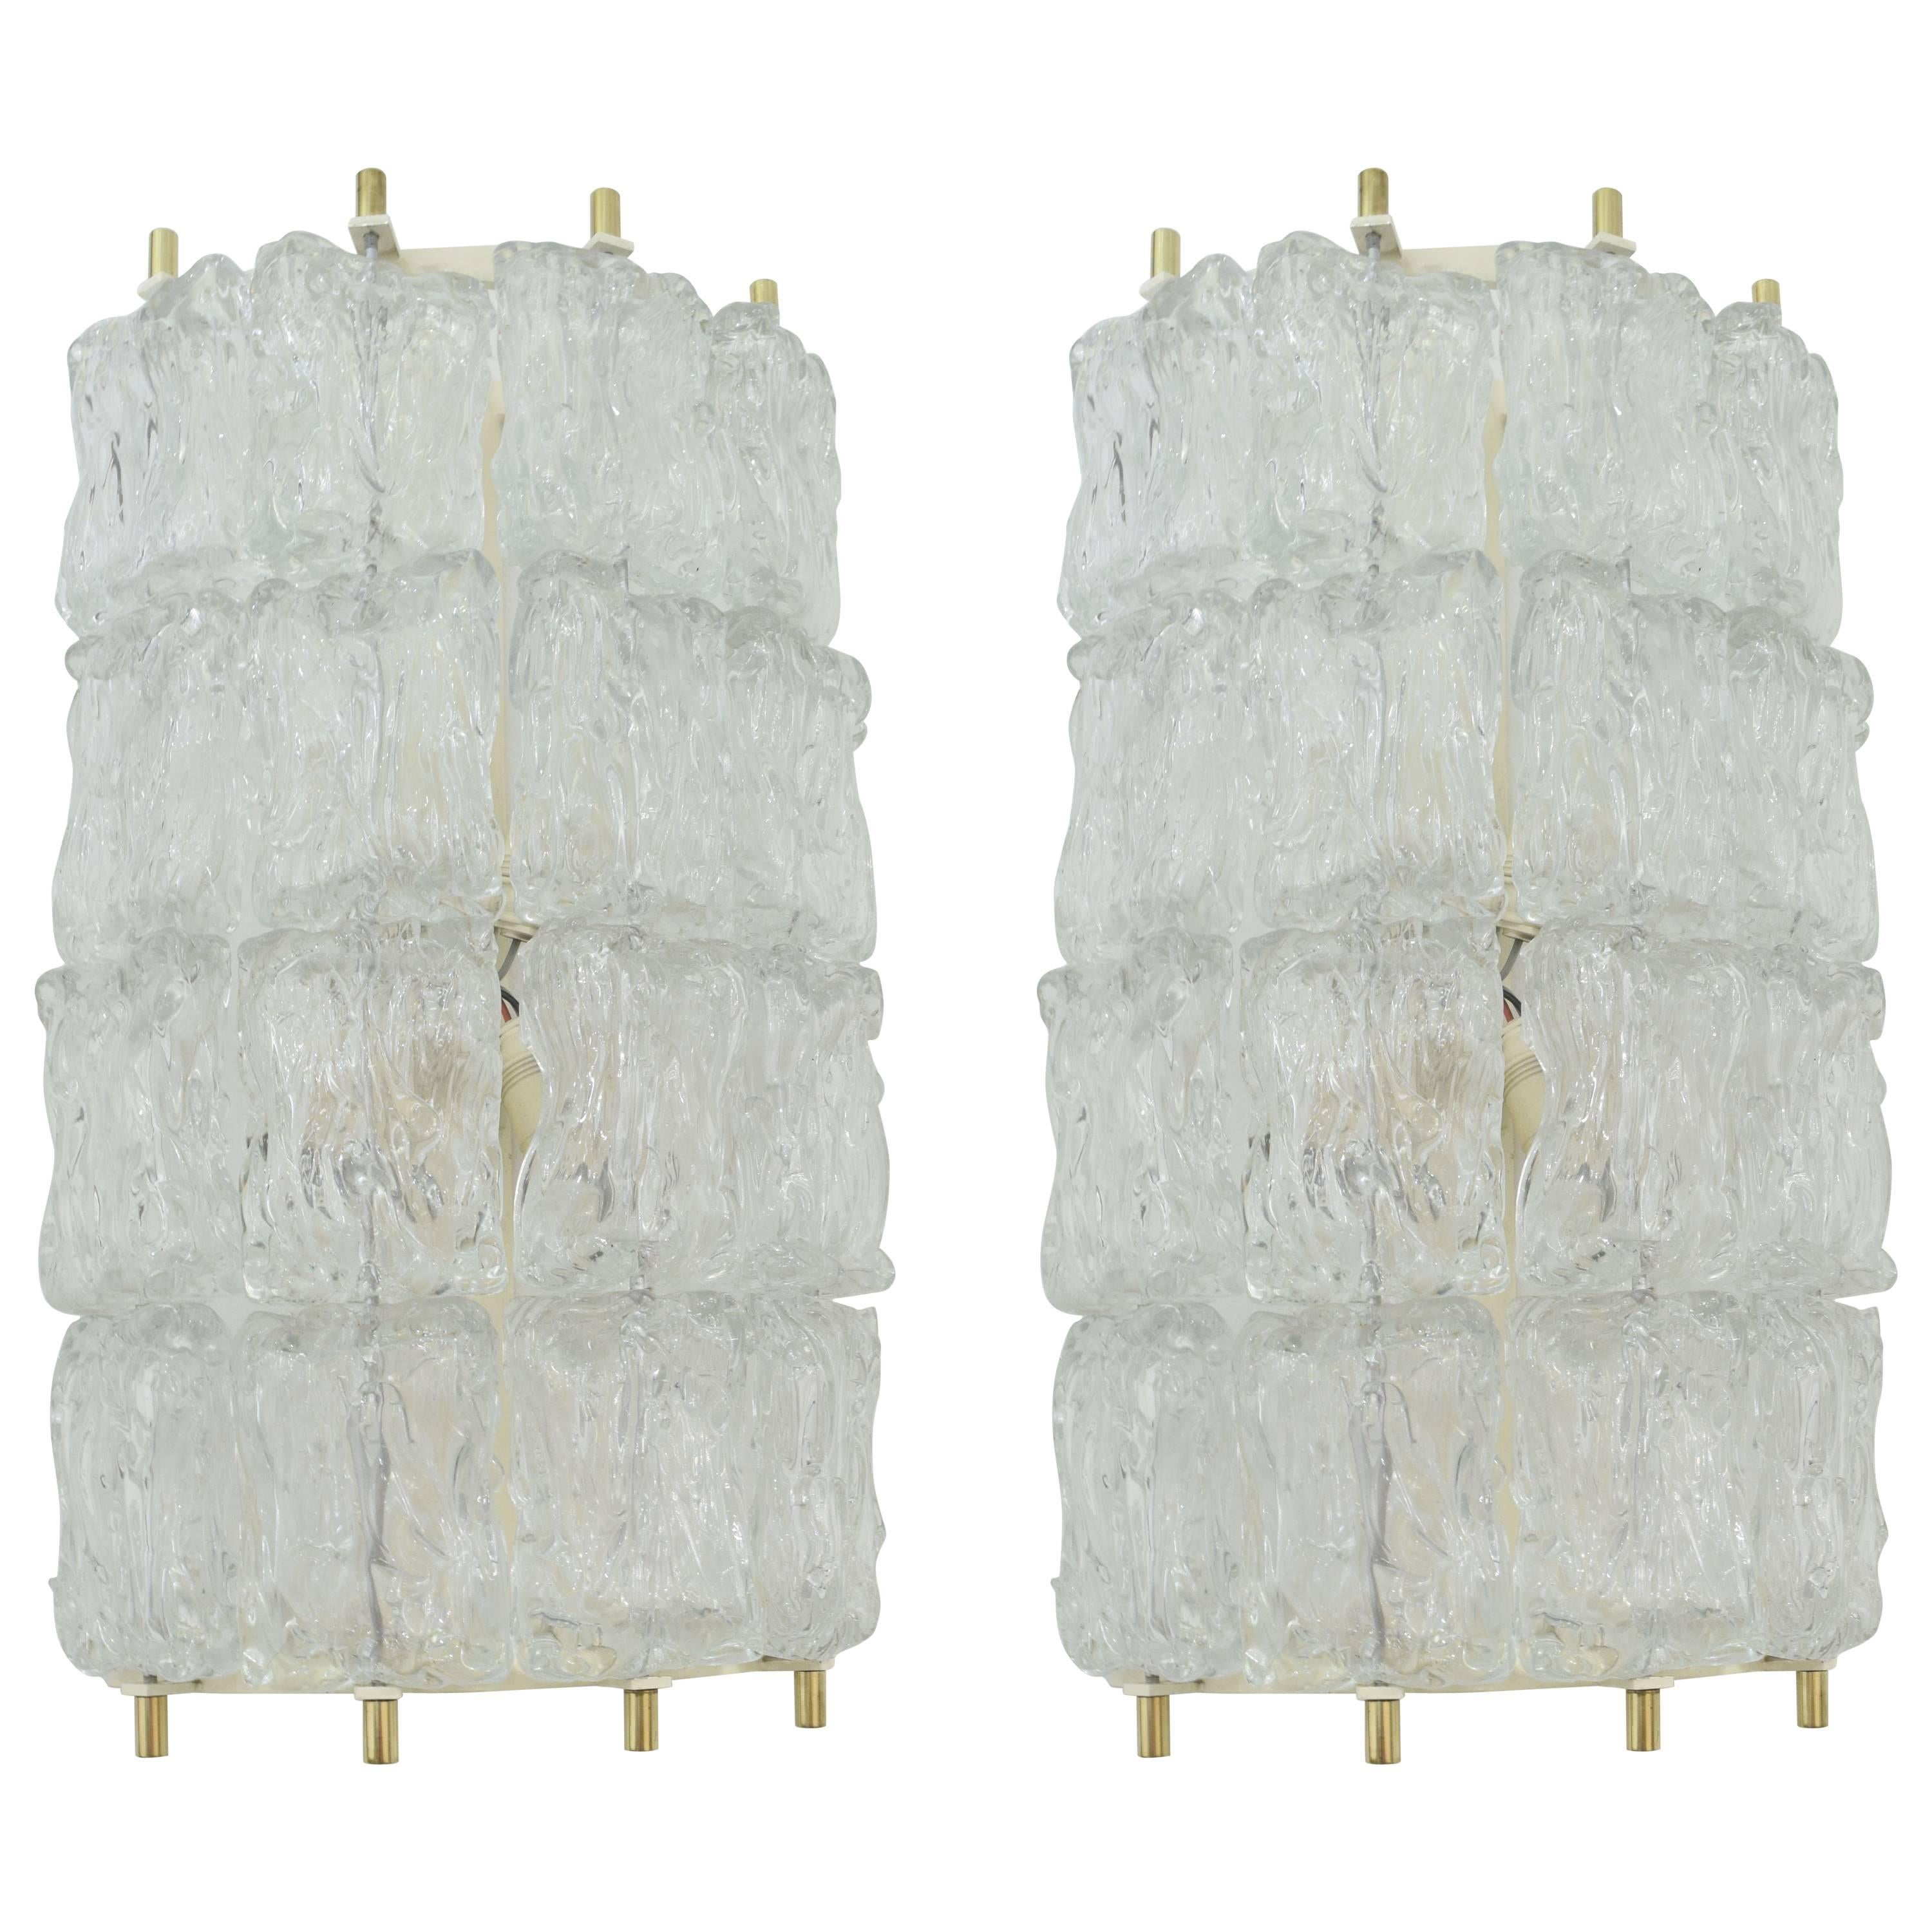 Pair of Ice-Textured Sconces